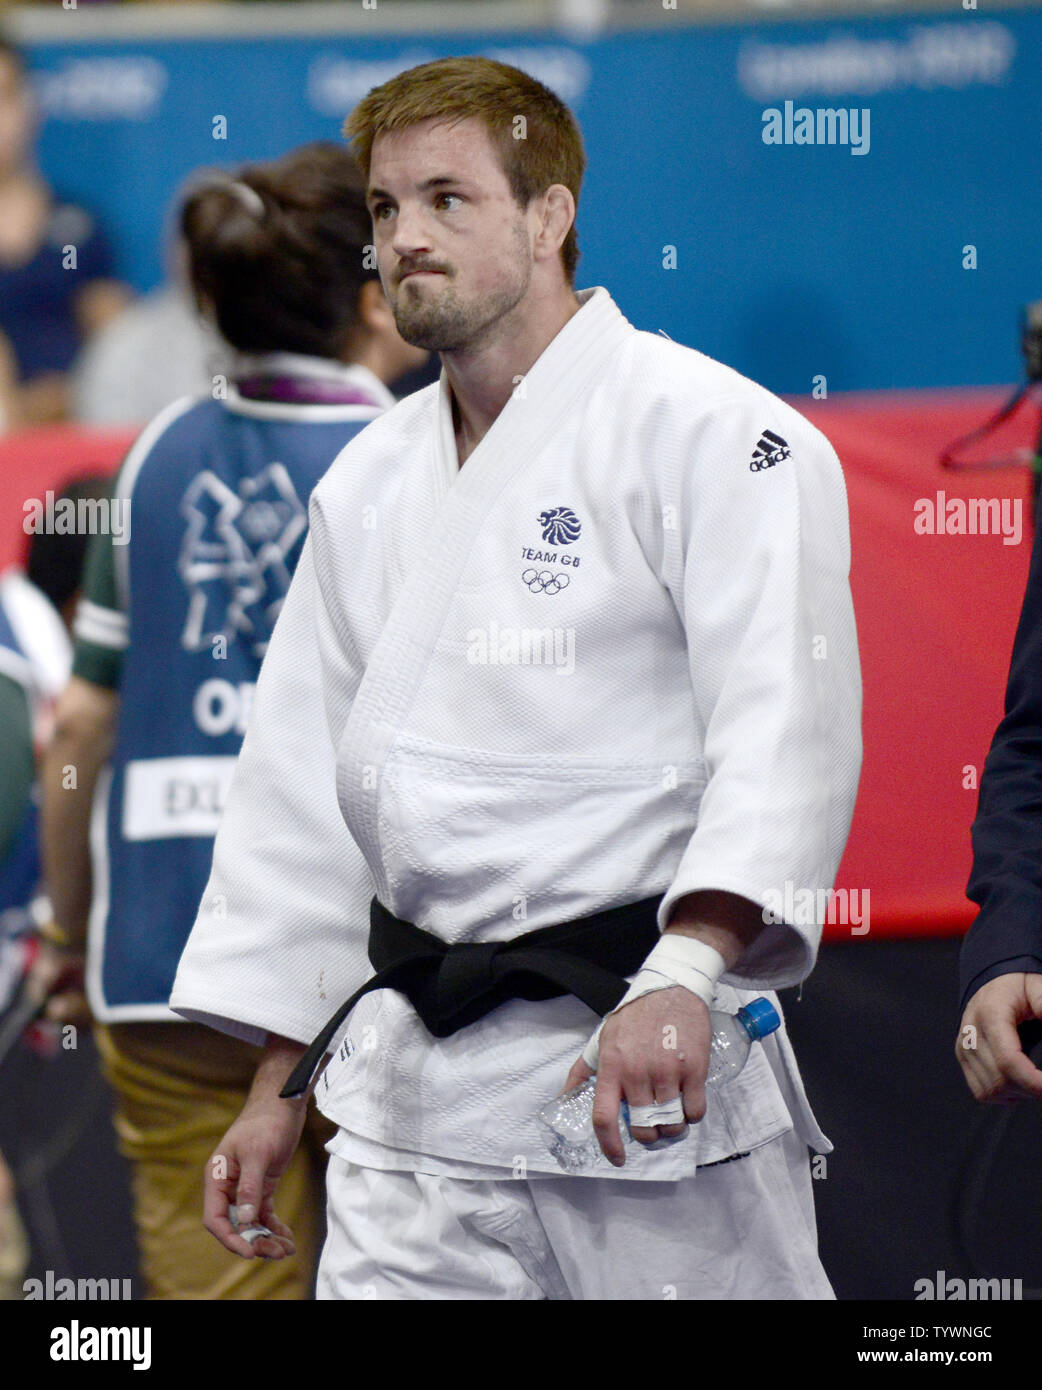 Colin Oates of Great Britain walks away from the floor after losing to Jun-Ho Cho of the Republic of Korea (South Korea) in the Men's Judo 66kg Repechage contest at the London 2012 Summer Olympic Games on July 29, 2012 in London. Jun-Ho Cho won the contest.  UPI/Ron Sachs Stock Photo